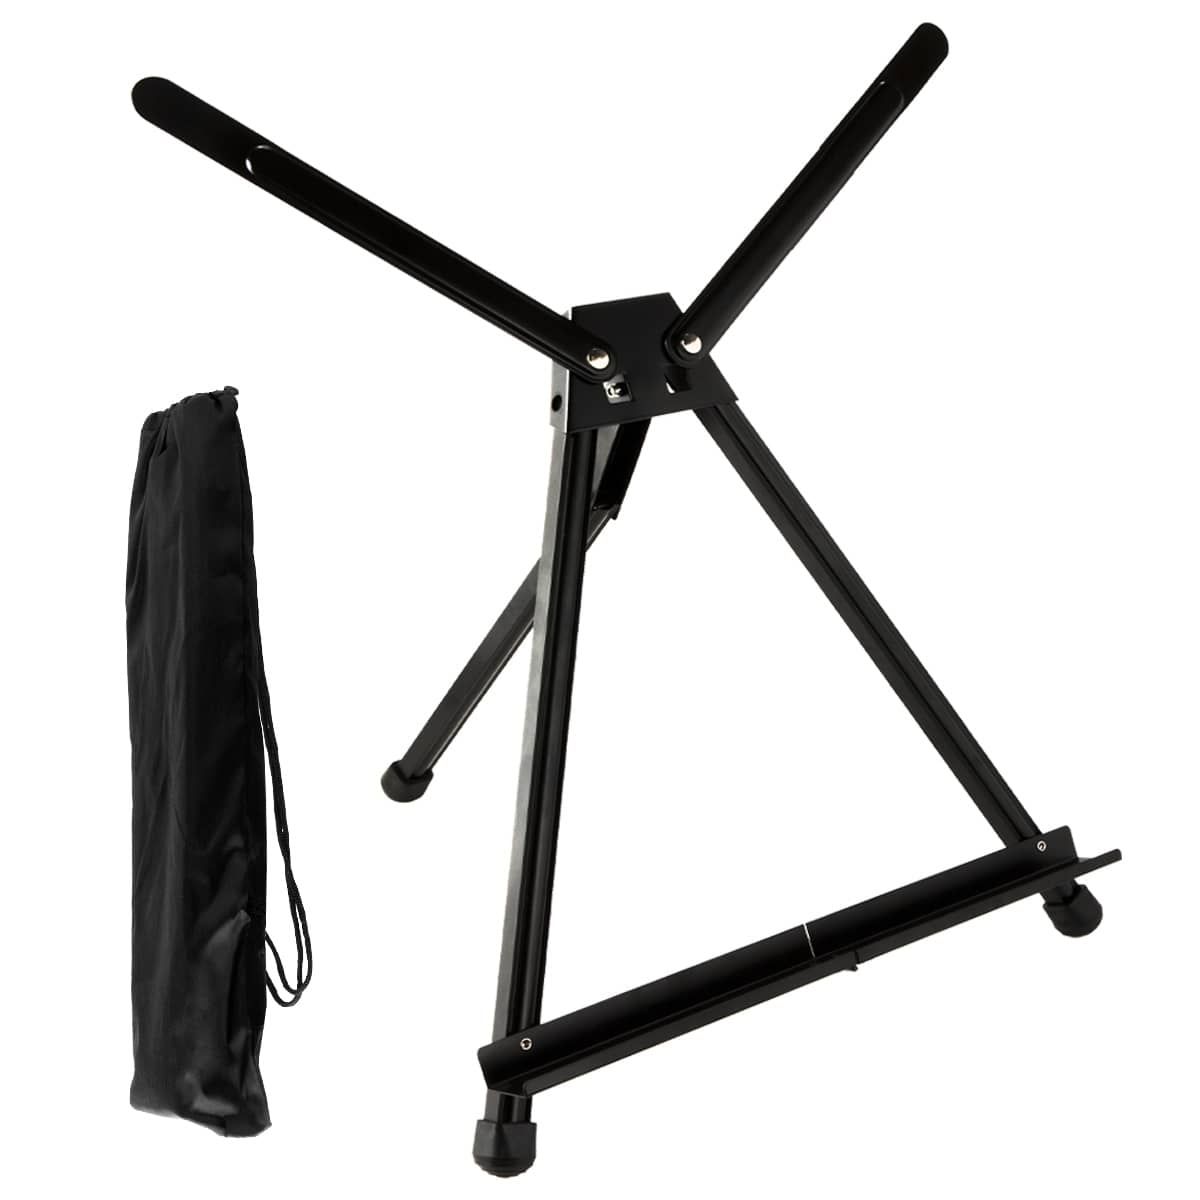 Black Collapsible Metal Easel for Presentations